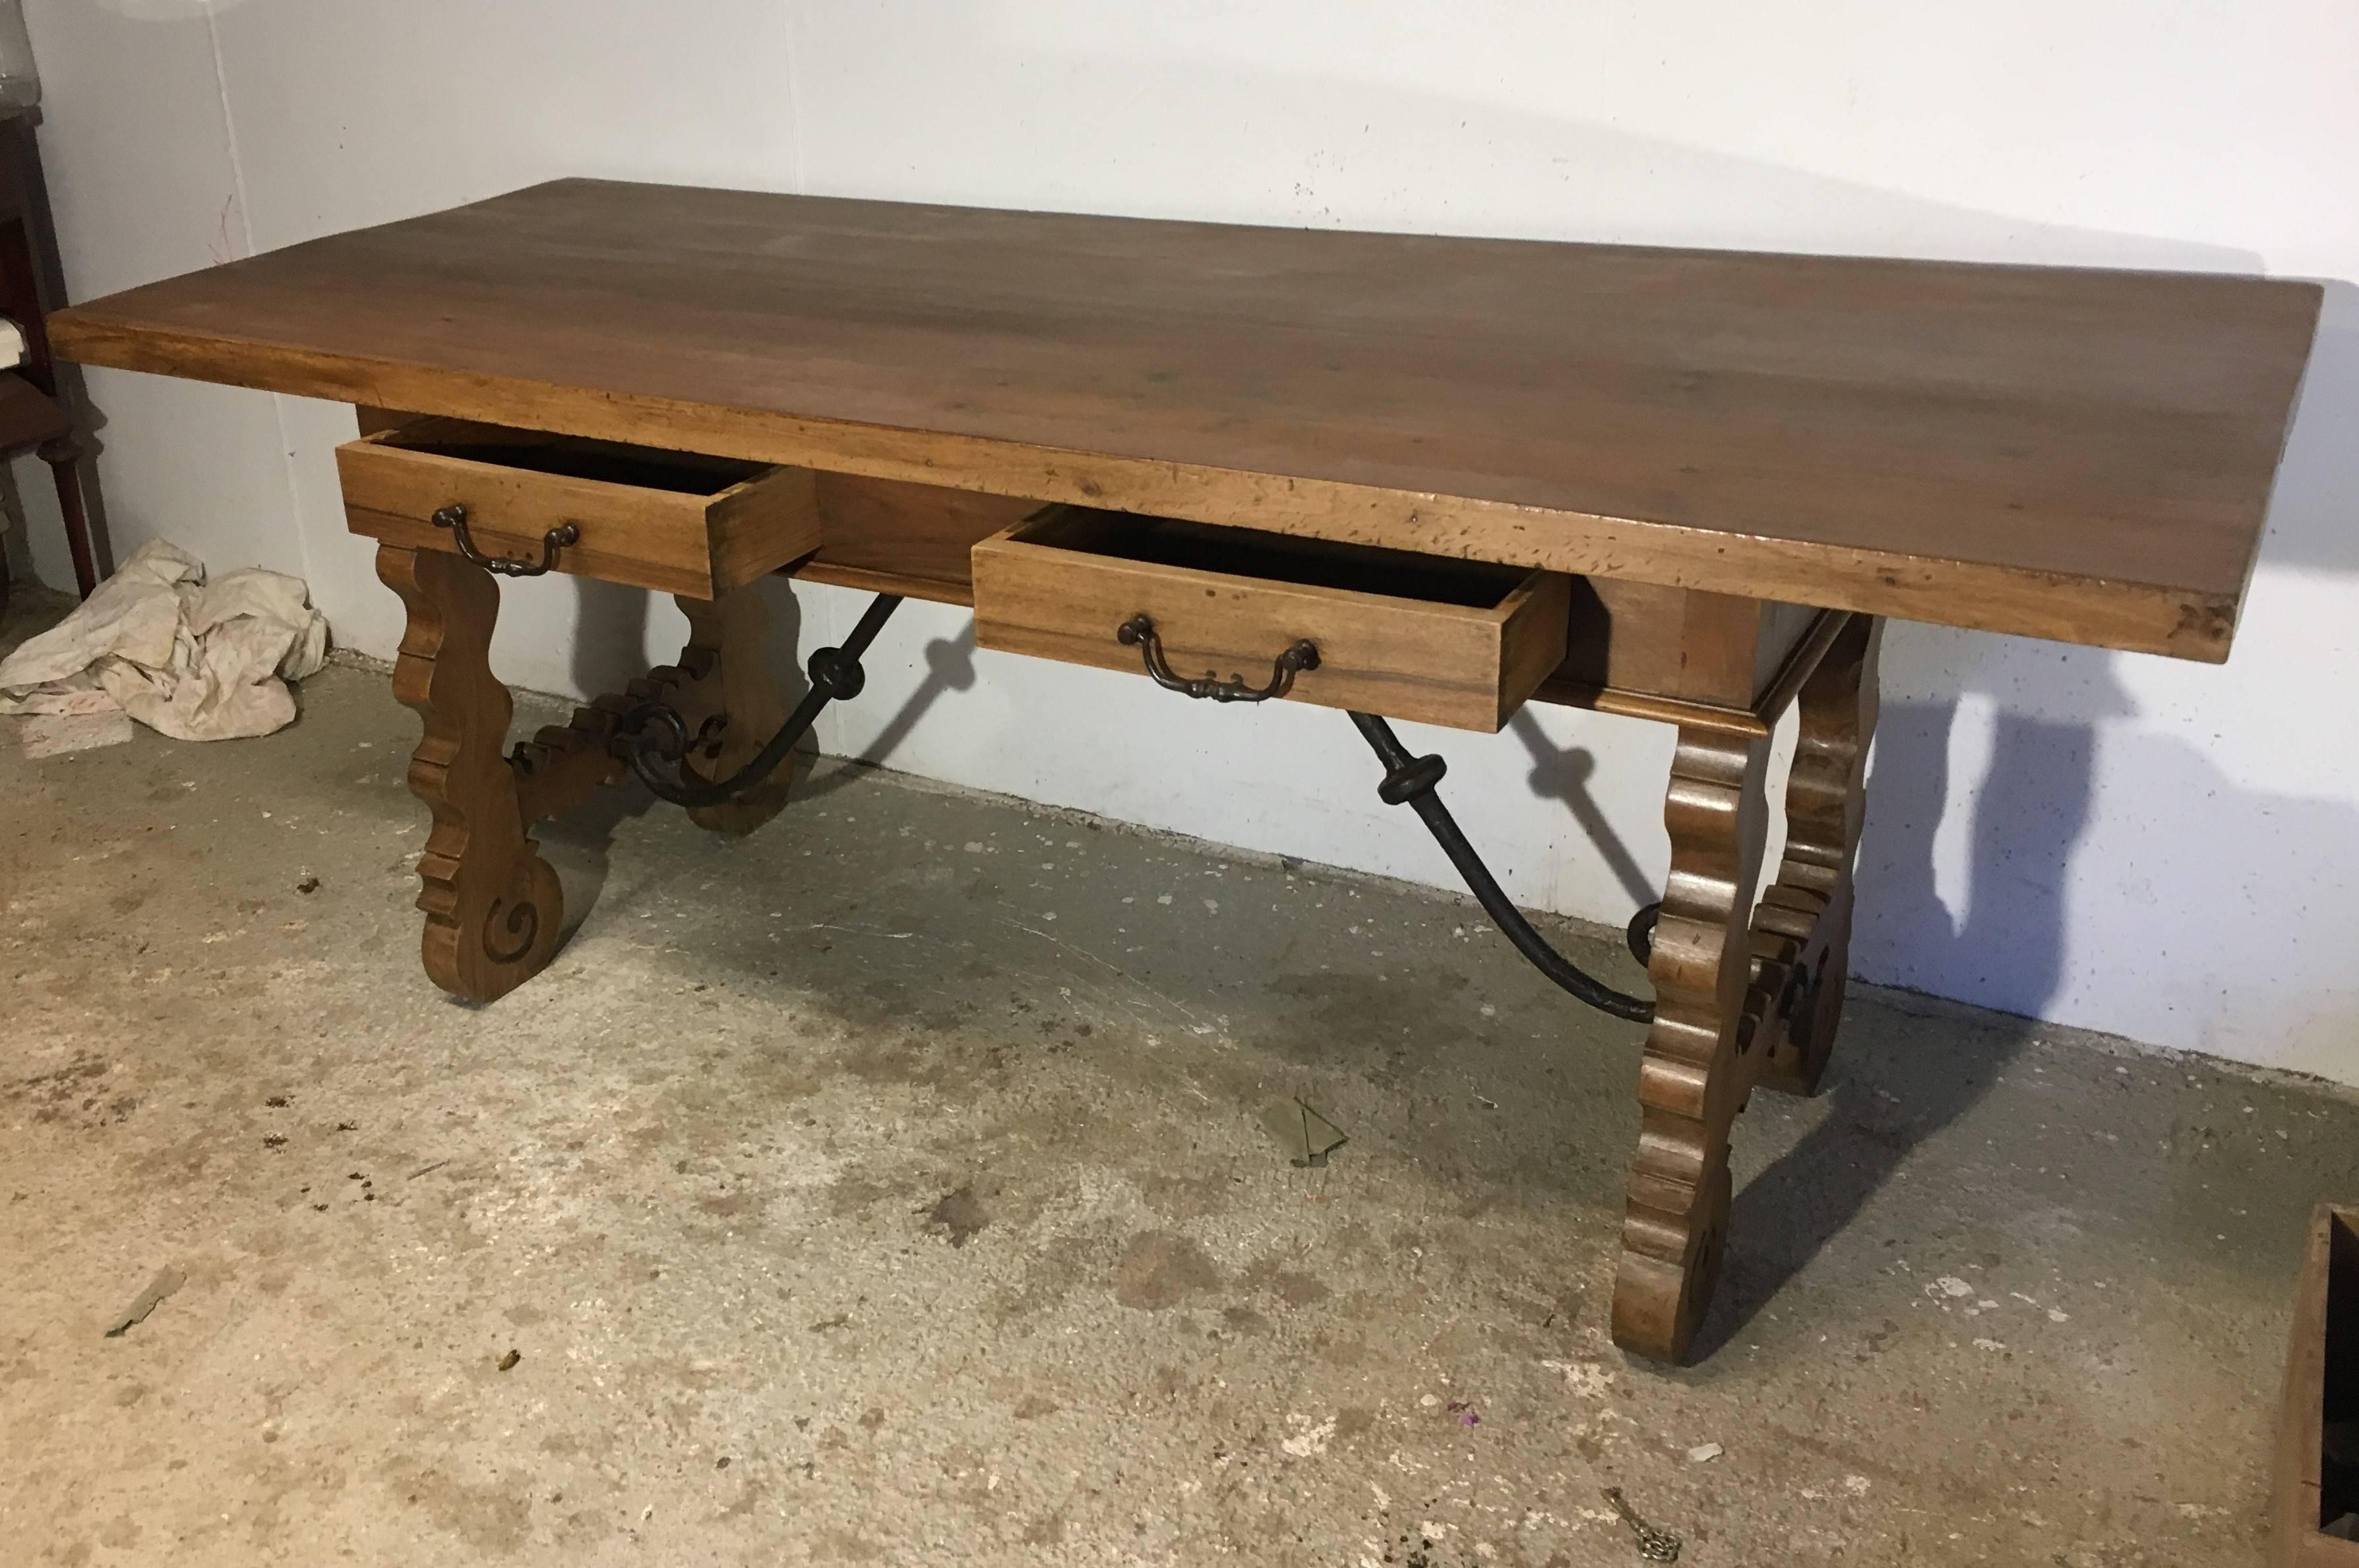 This elegant, antique fruitwood desk was crafted in Spain, circa 1780. The rustic writing table has been stripped down from its original dark finish to a bleached one sealed with clear wax. The table has a top surface secured with four round forged